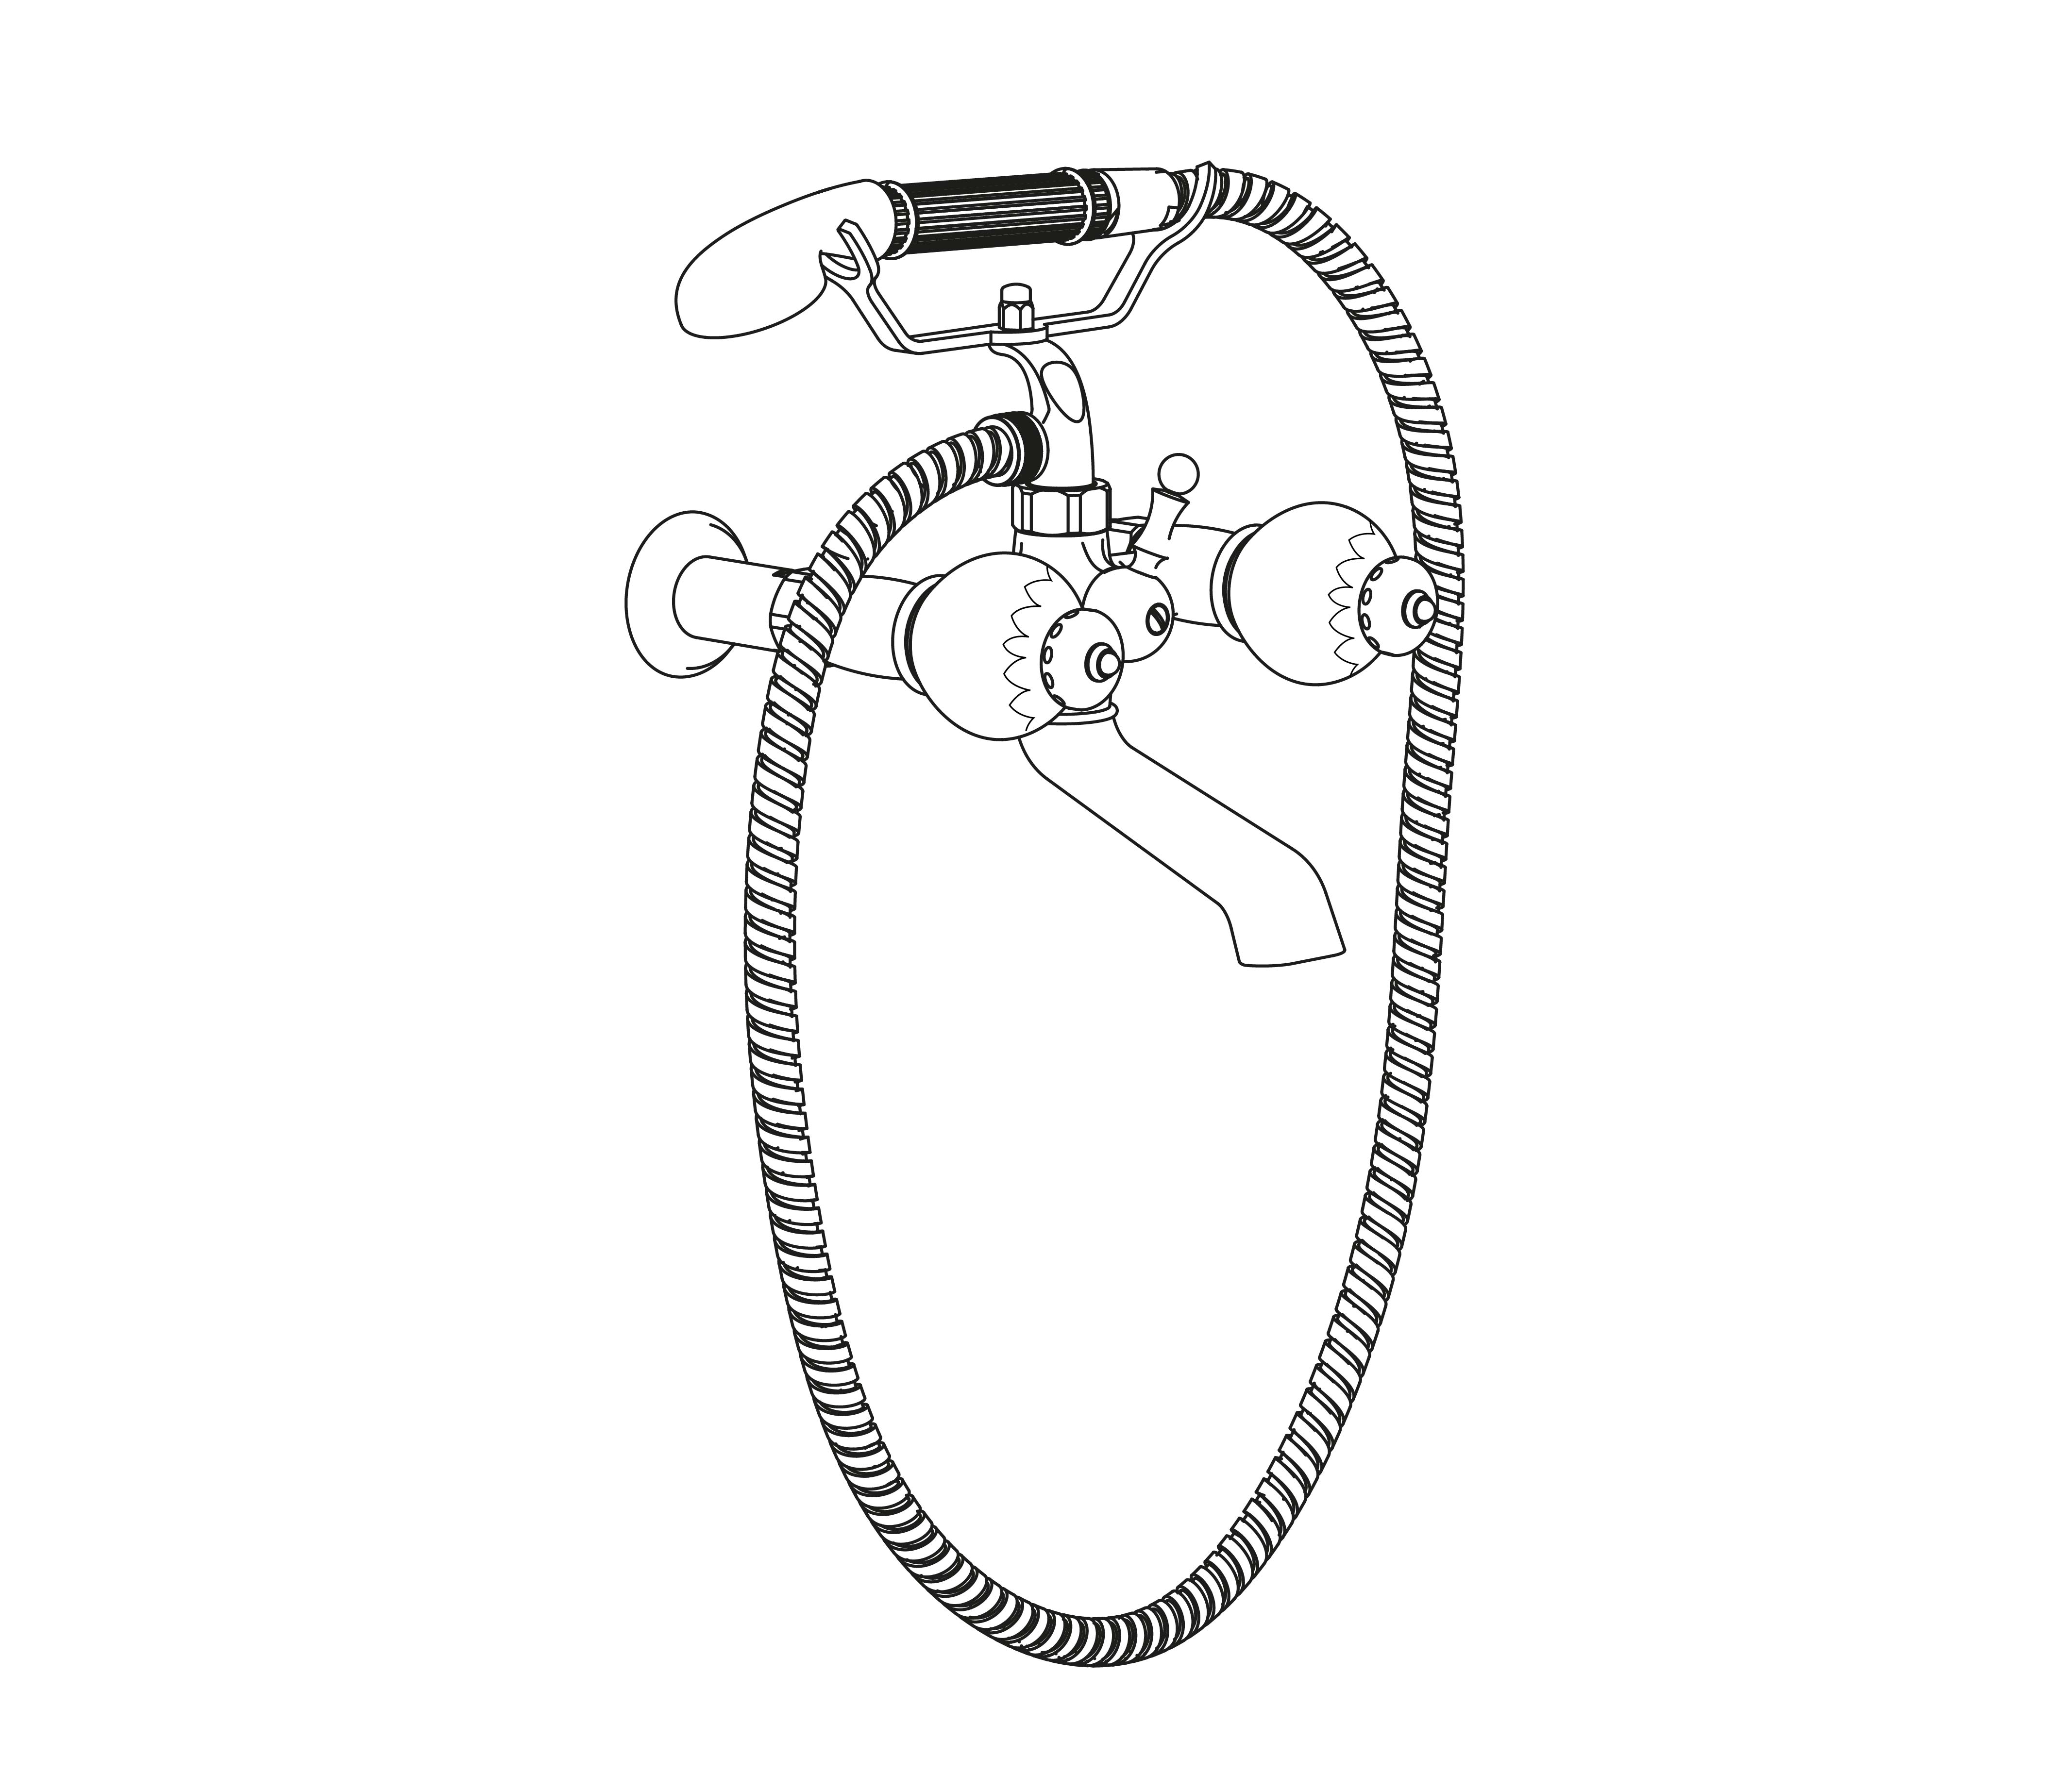 S180-3201 Wall mounted bath and shower mixer